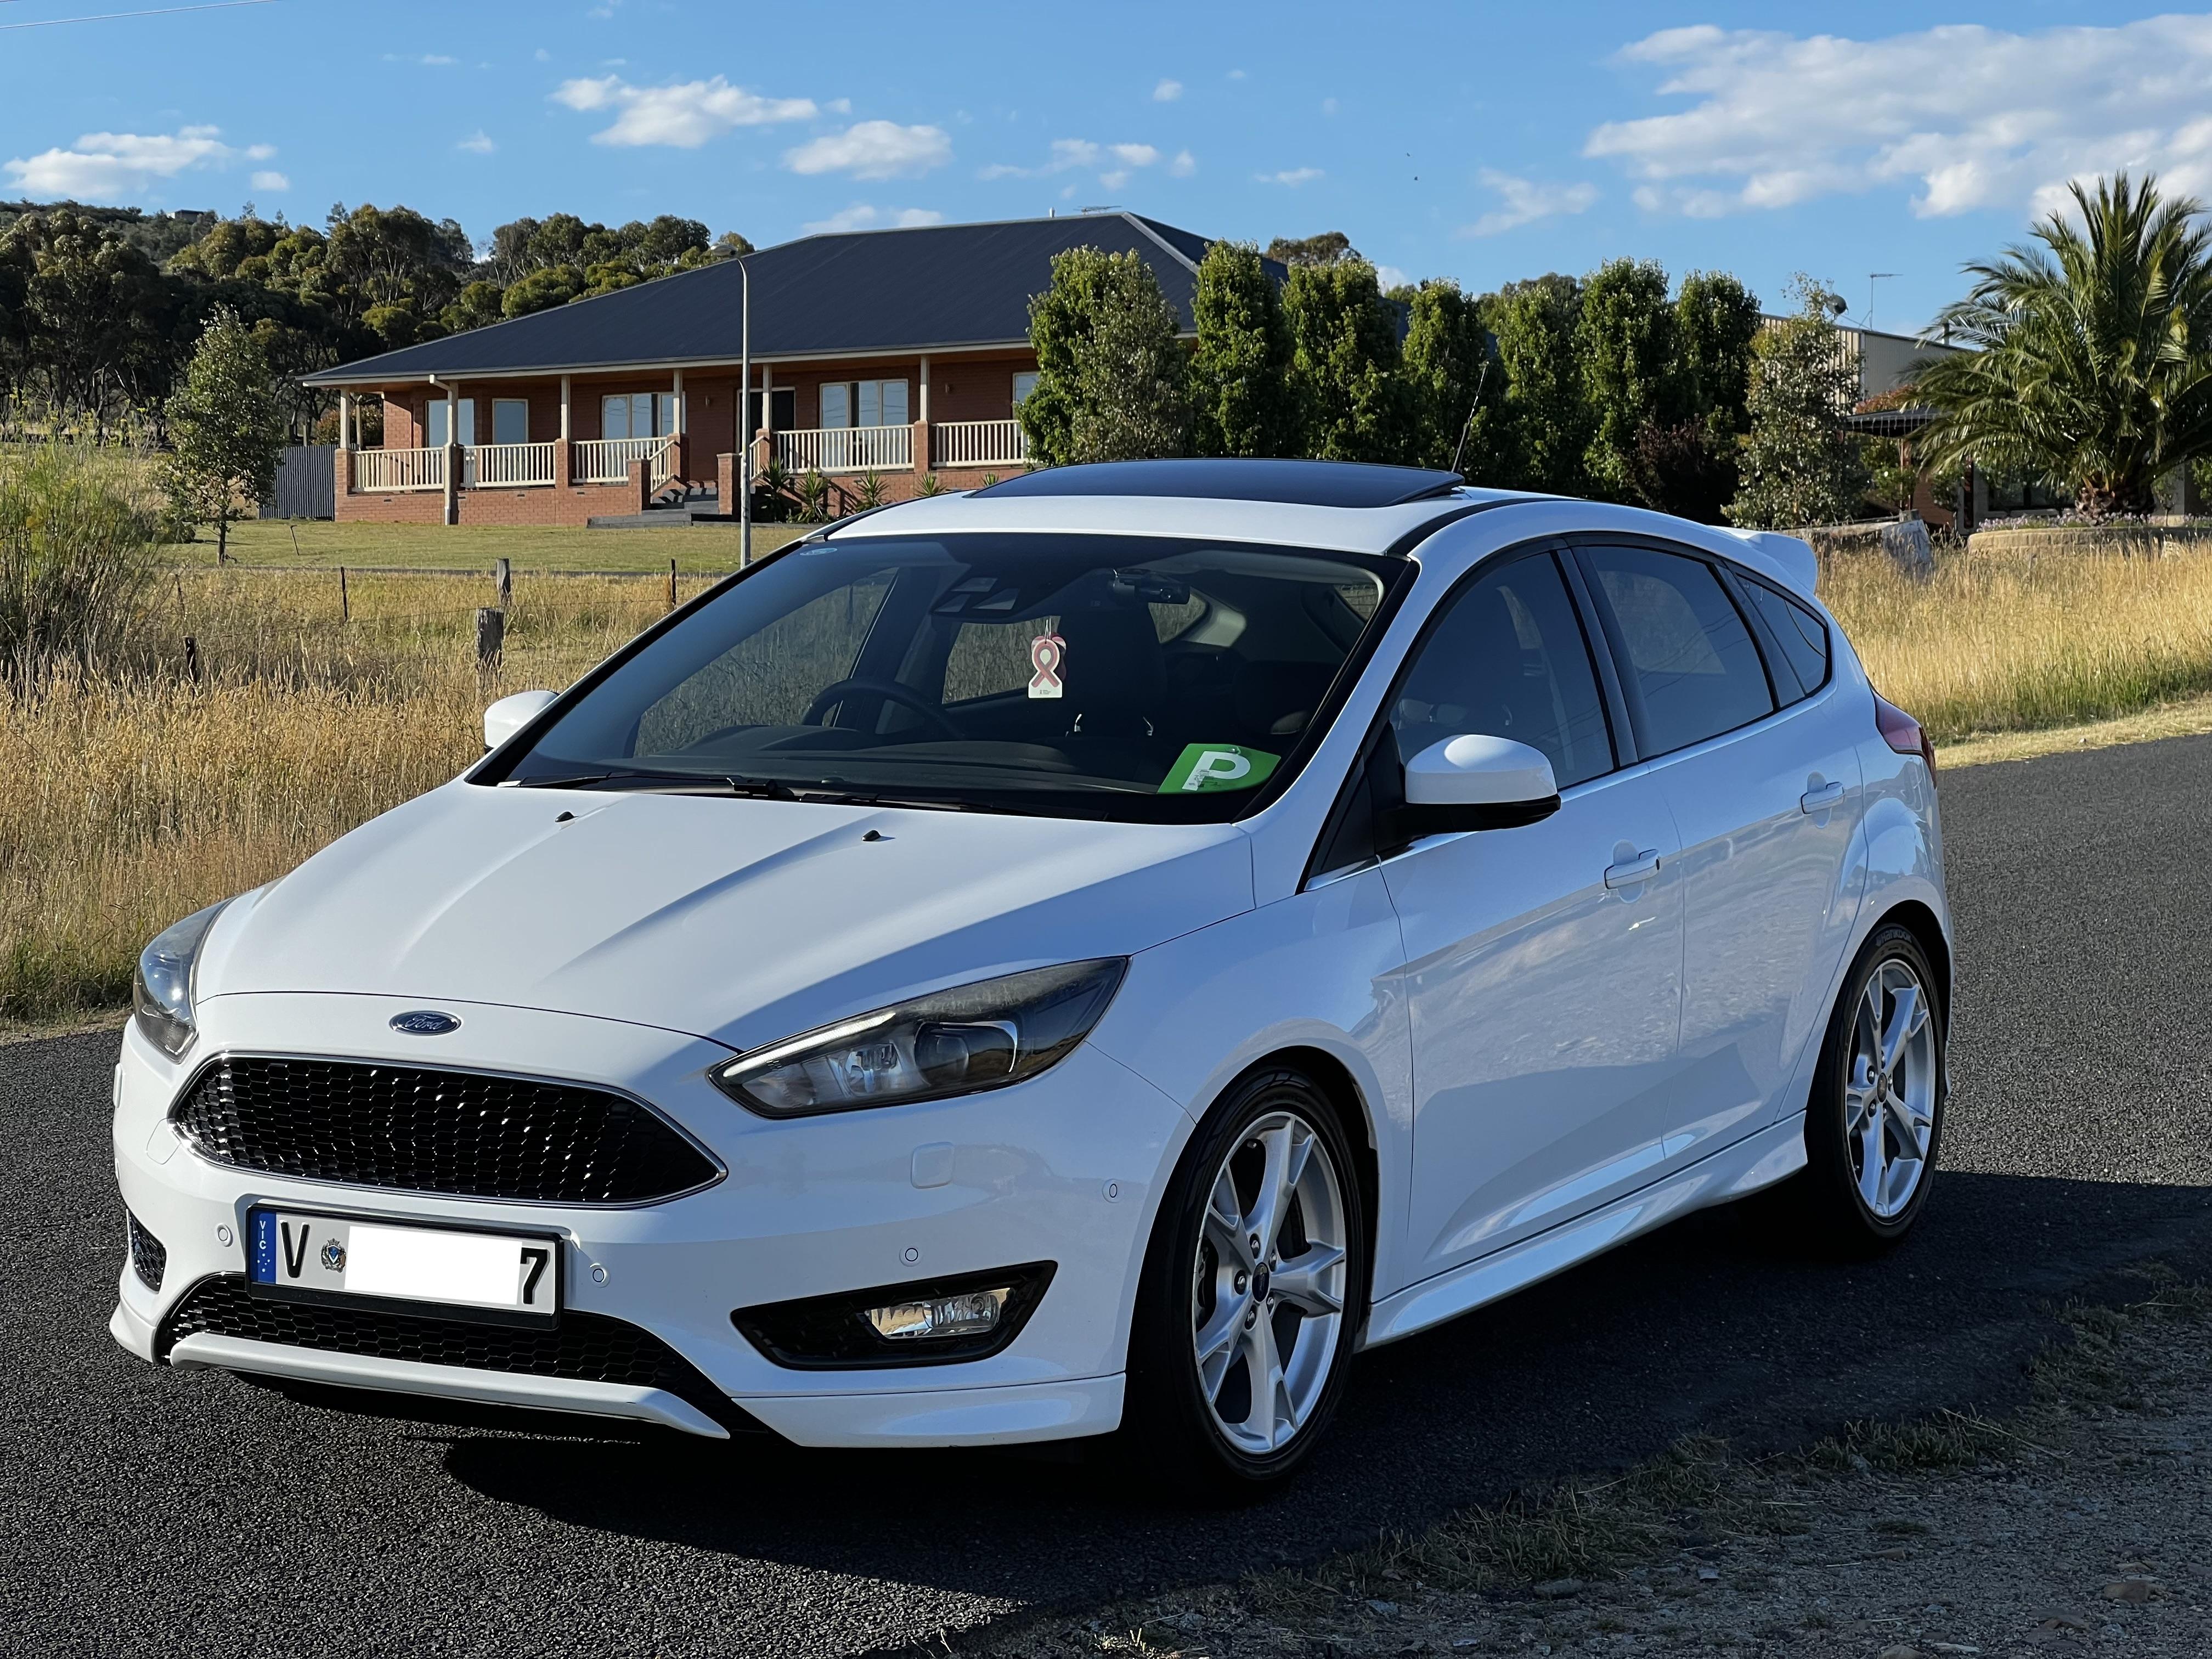 Ford Focus Review, Price and Specification